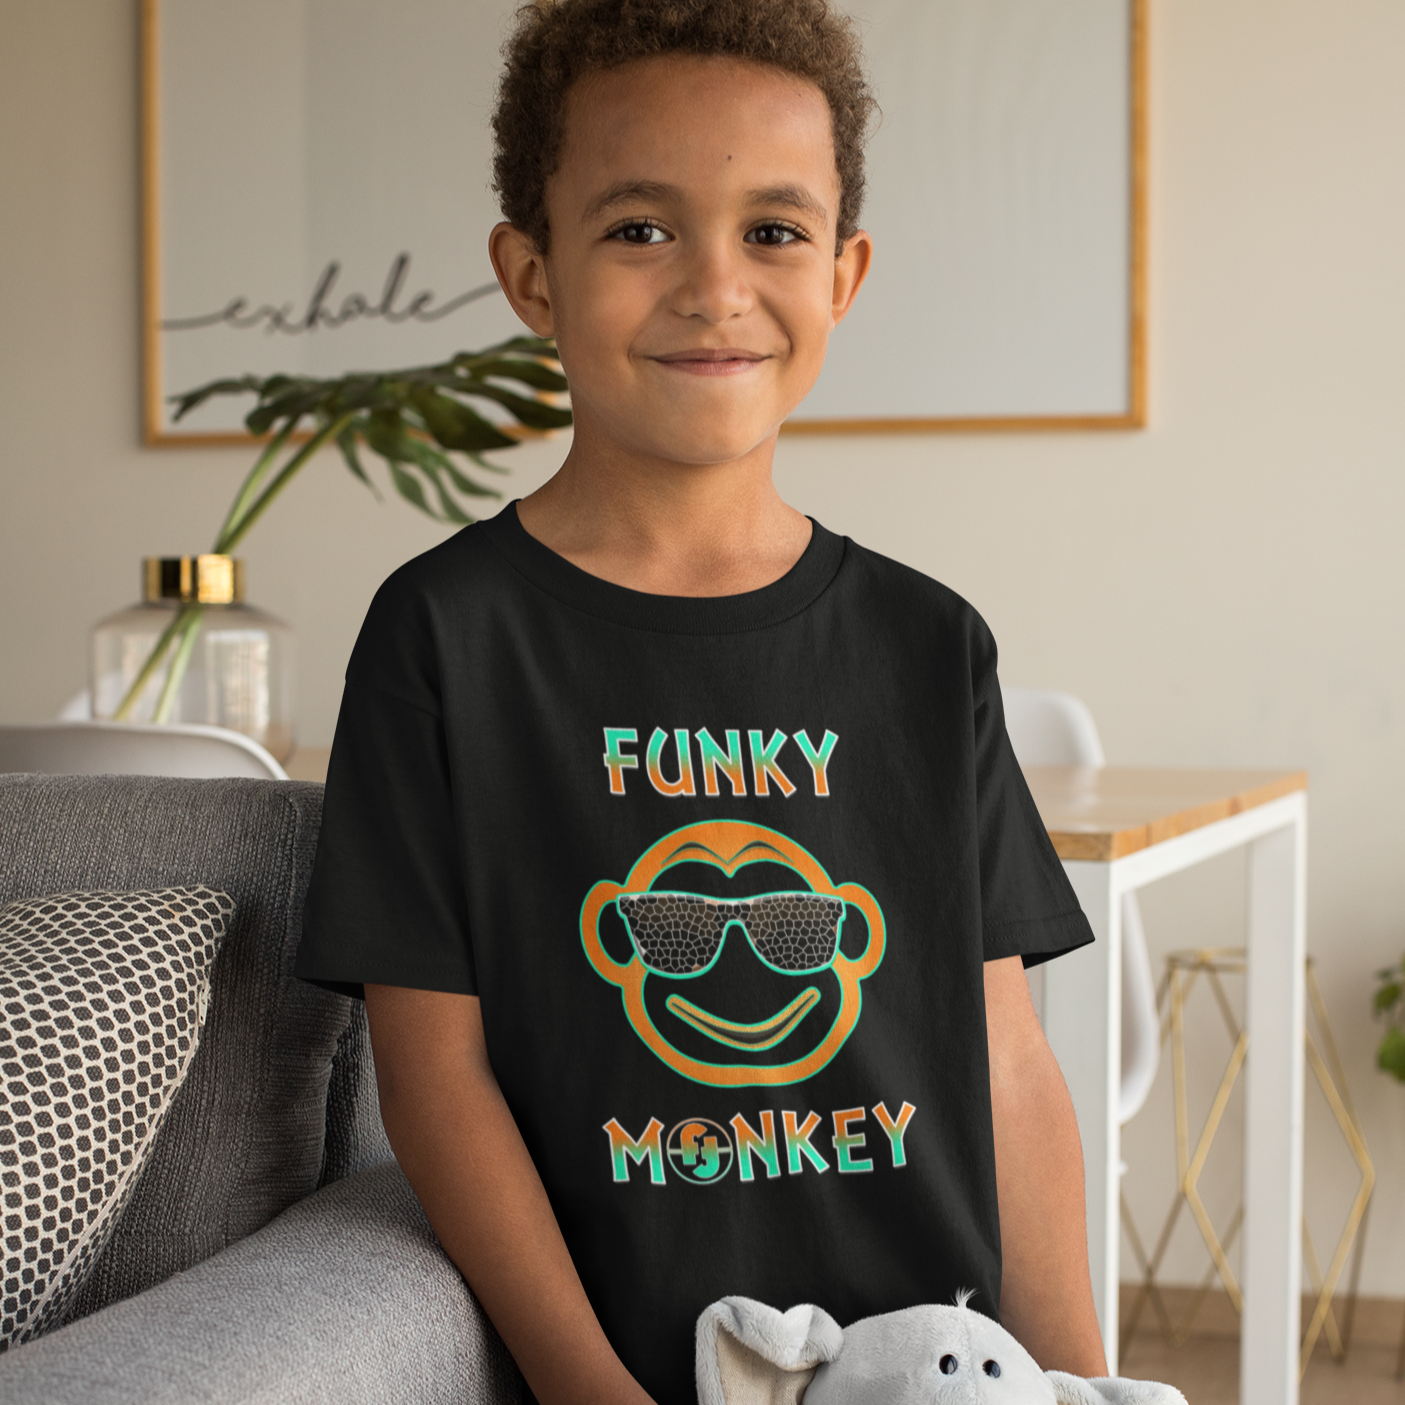 Fire Fit Designs Funny T Shirts for BOYS - Funky Monkey Funny Shirts Boys Gamer Gifts - Cool Boys Tshirts - Funny Kids Shirts